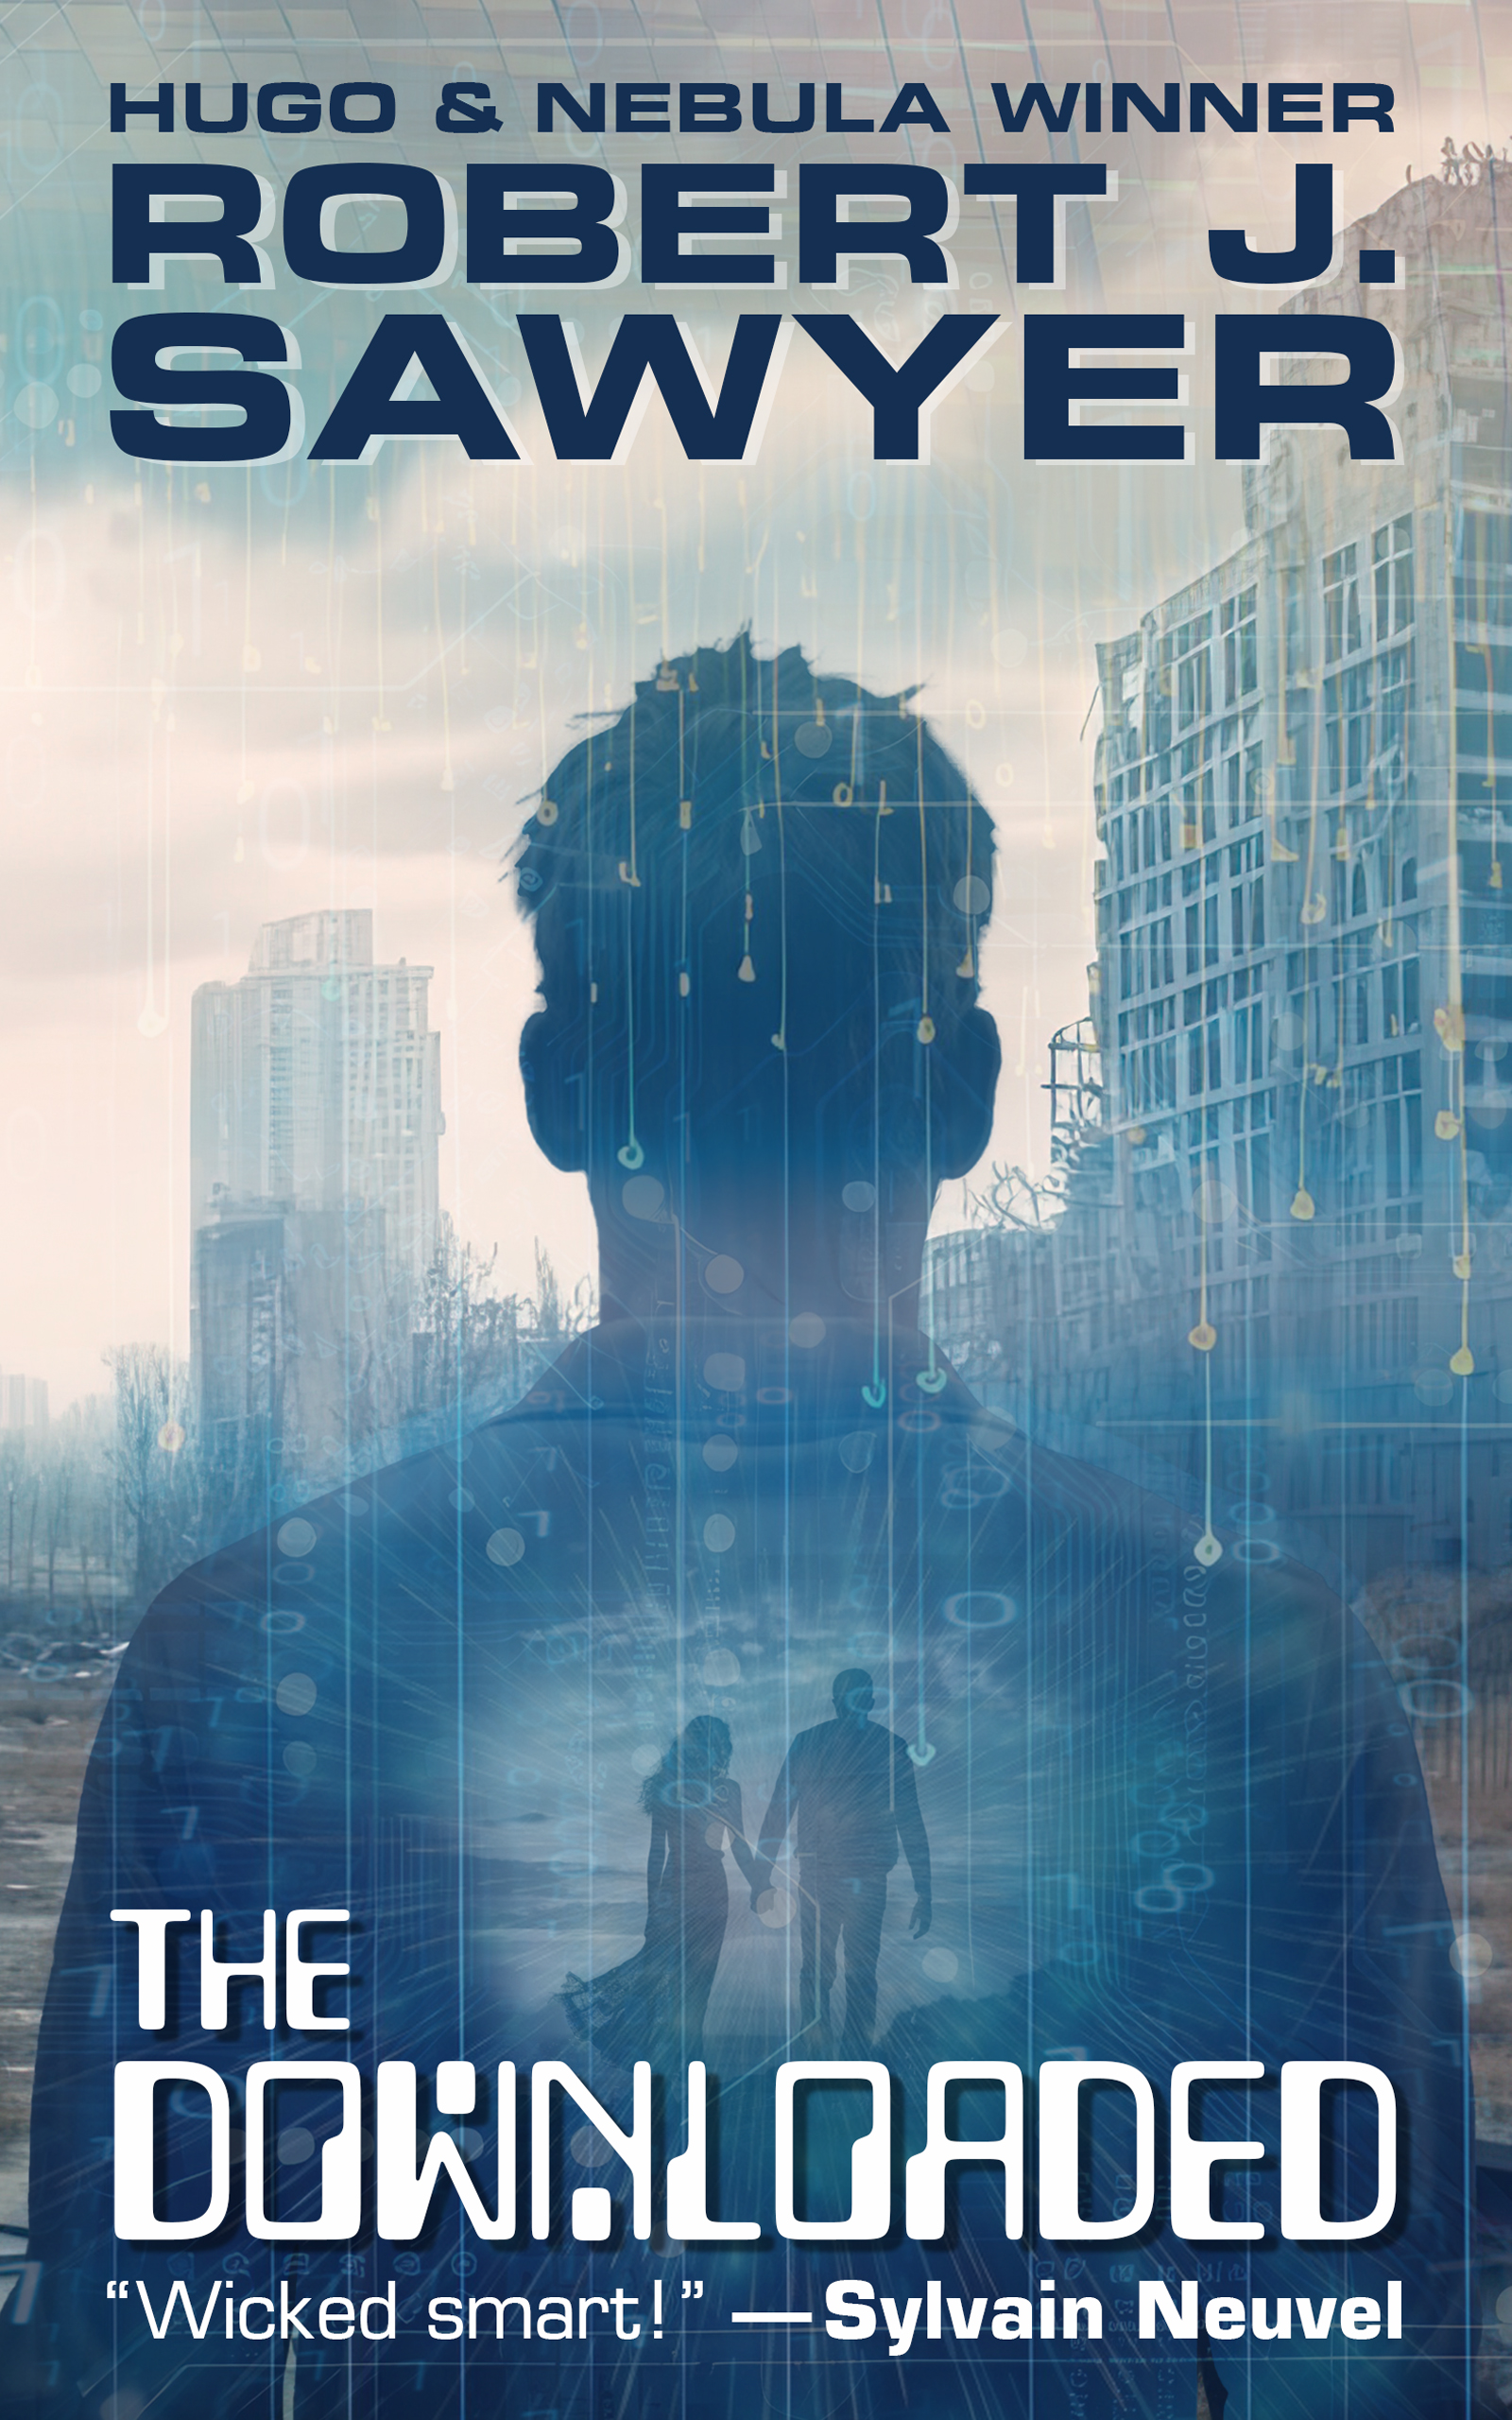 The cover of The Downloaded by Robert J. Sawyer.